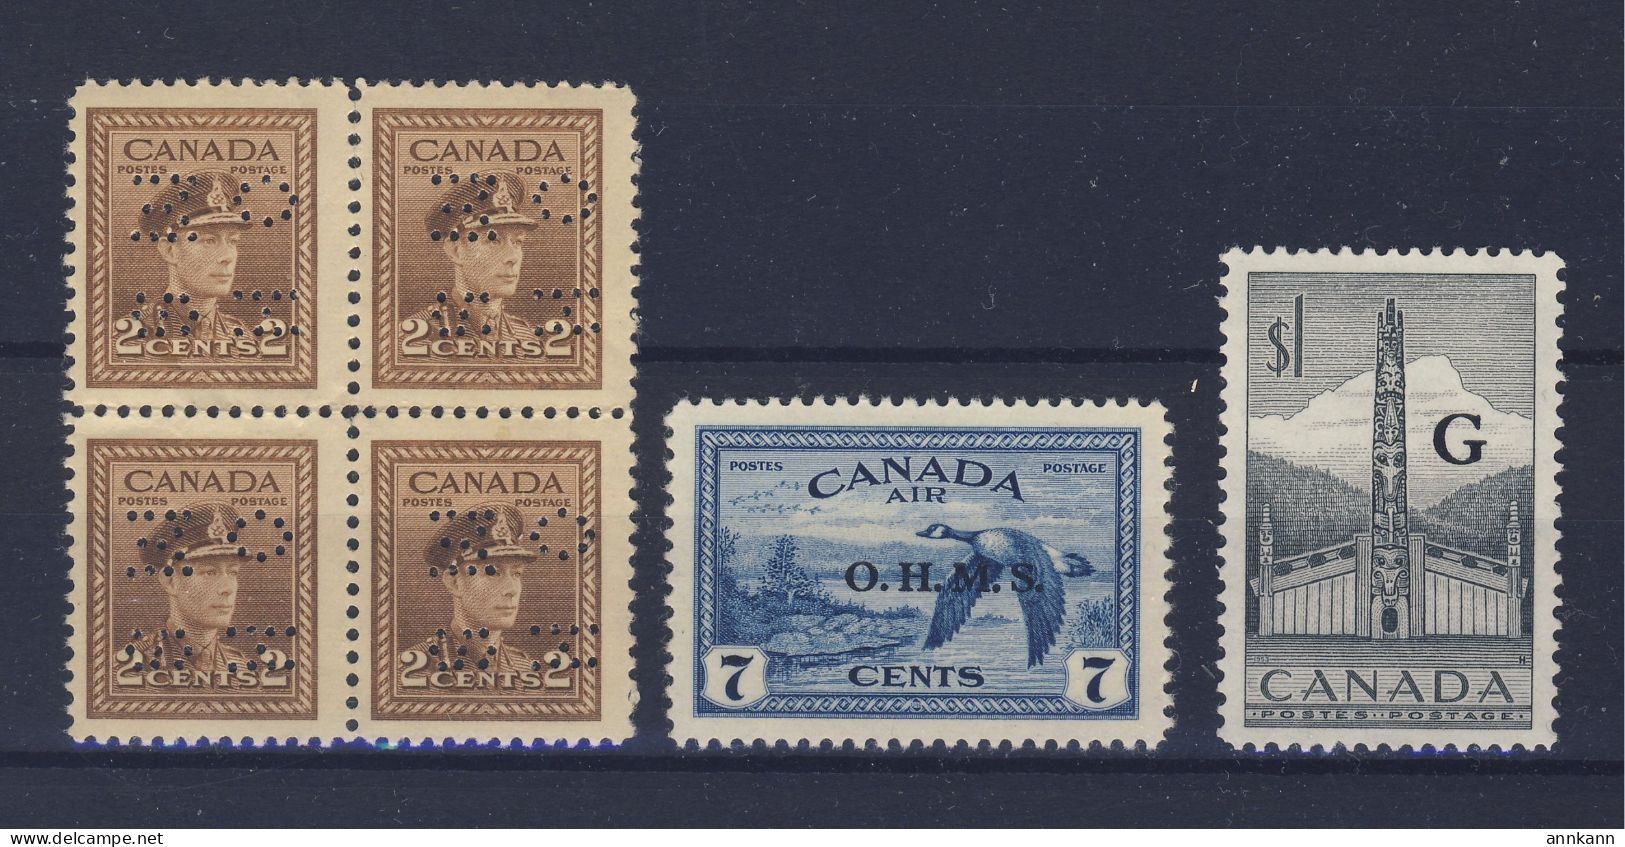 6x Canada Stamps #O250-2c Block Of 4 #CO1-7c #O32-$1.00 "G" Guide Value= $38.00 - Perfins